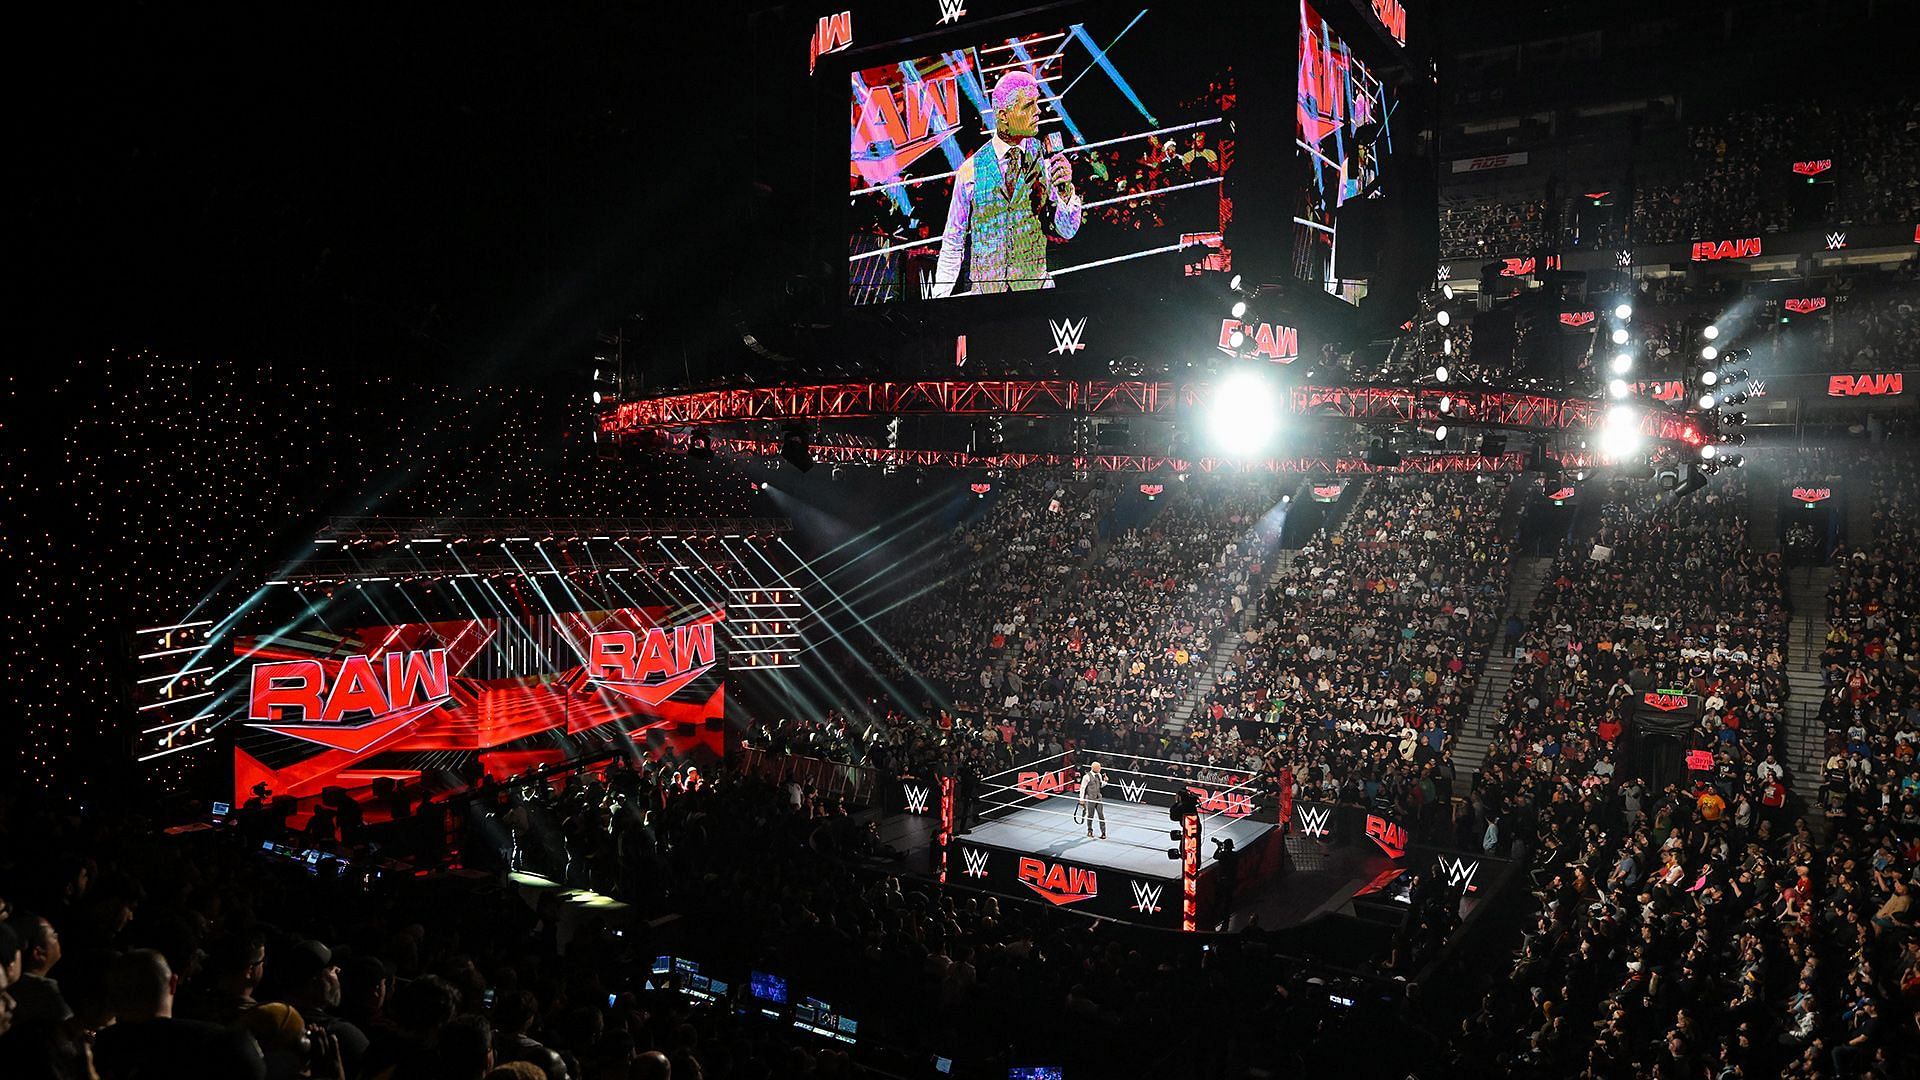 The WWE Universe packs their local arena for a live RAW